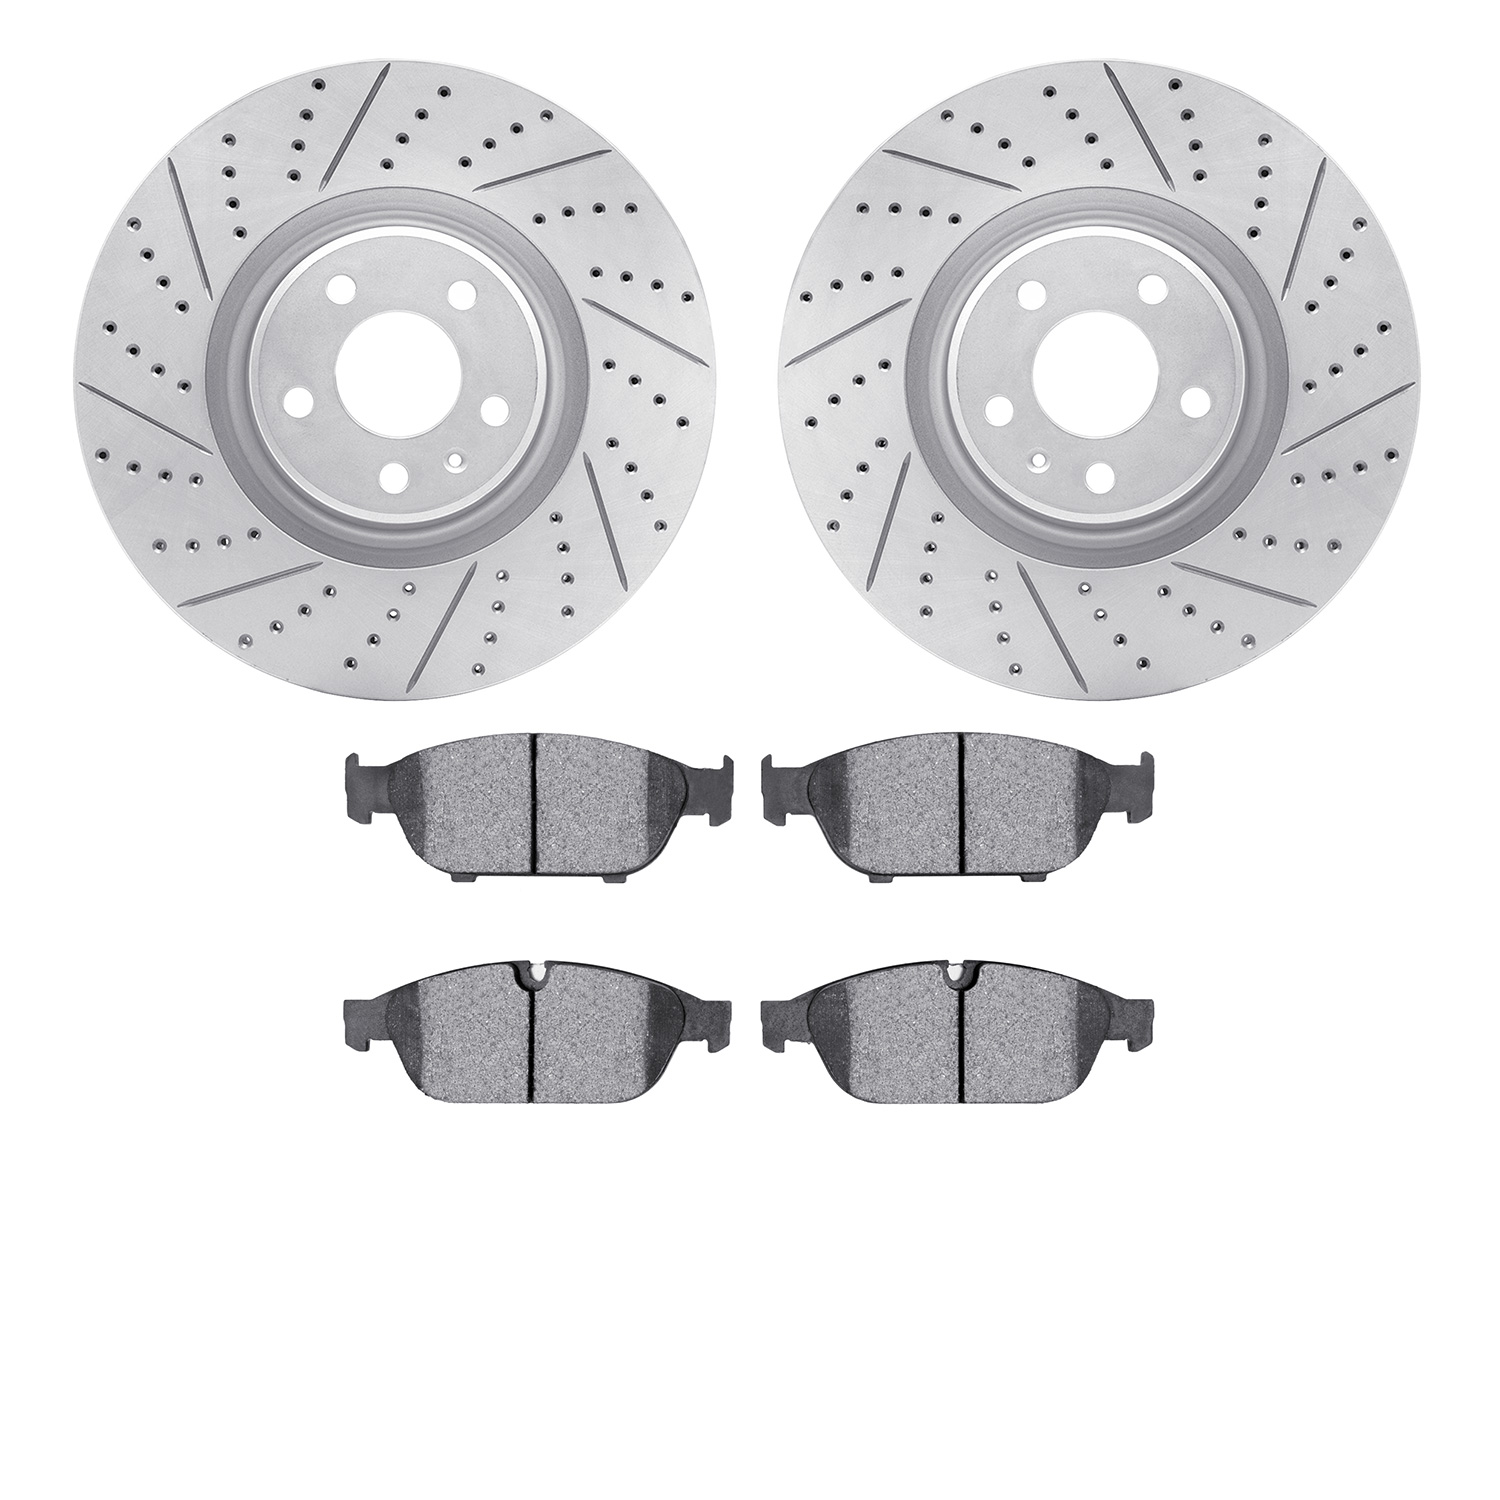 2702-73105 Geoperformance Drilled/Slotted Brake Rotors with Active Performance Pads Kit, 2012-2018 Audi/Volkswagen, Position: Fr